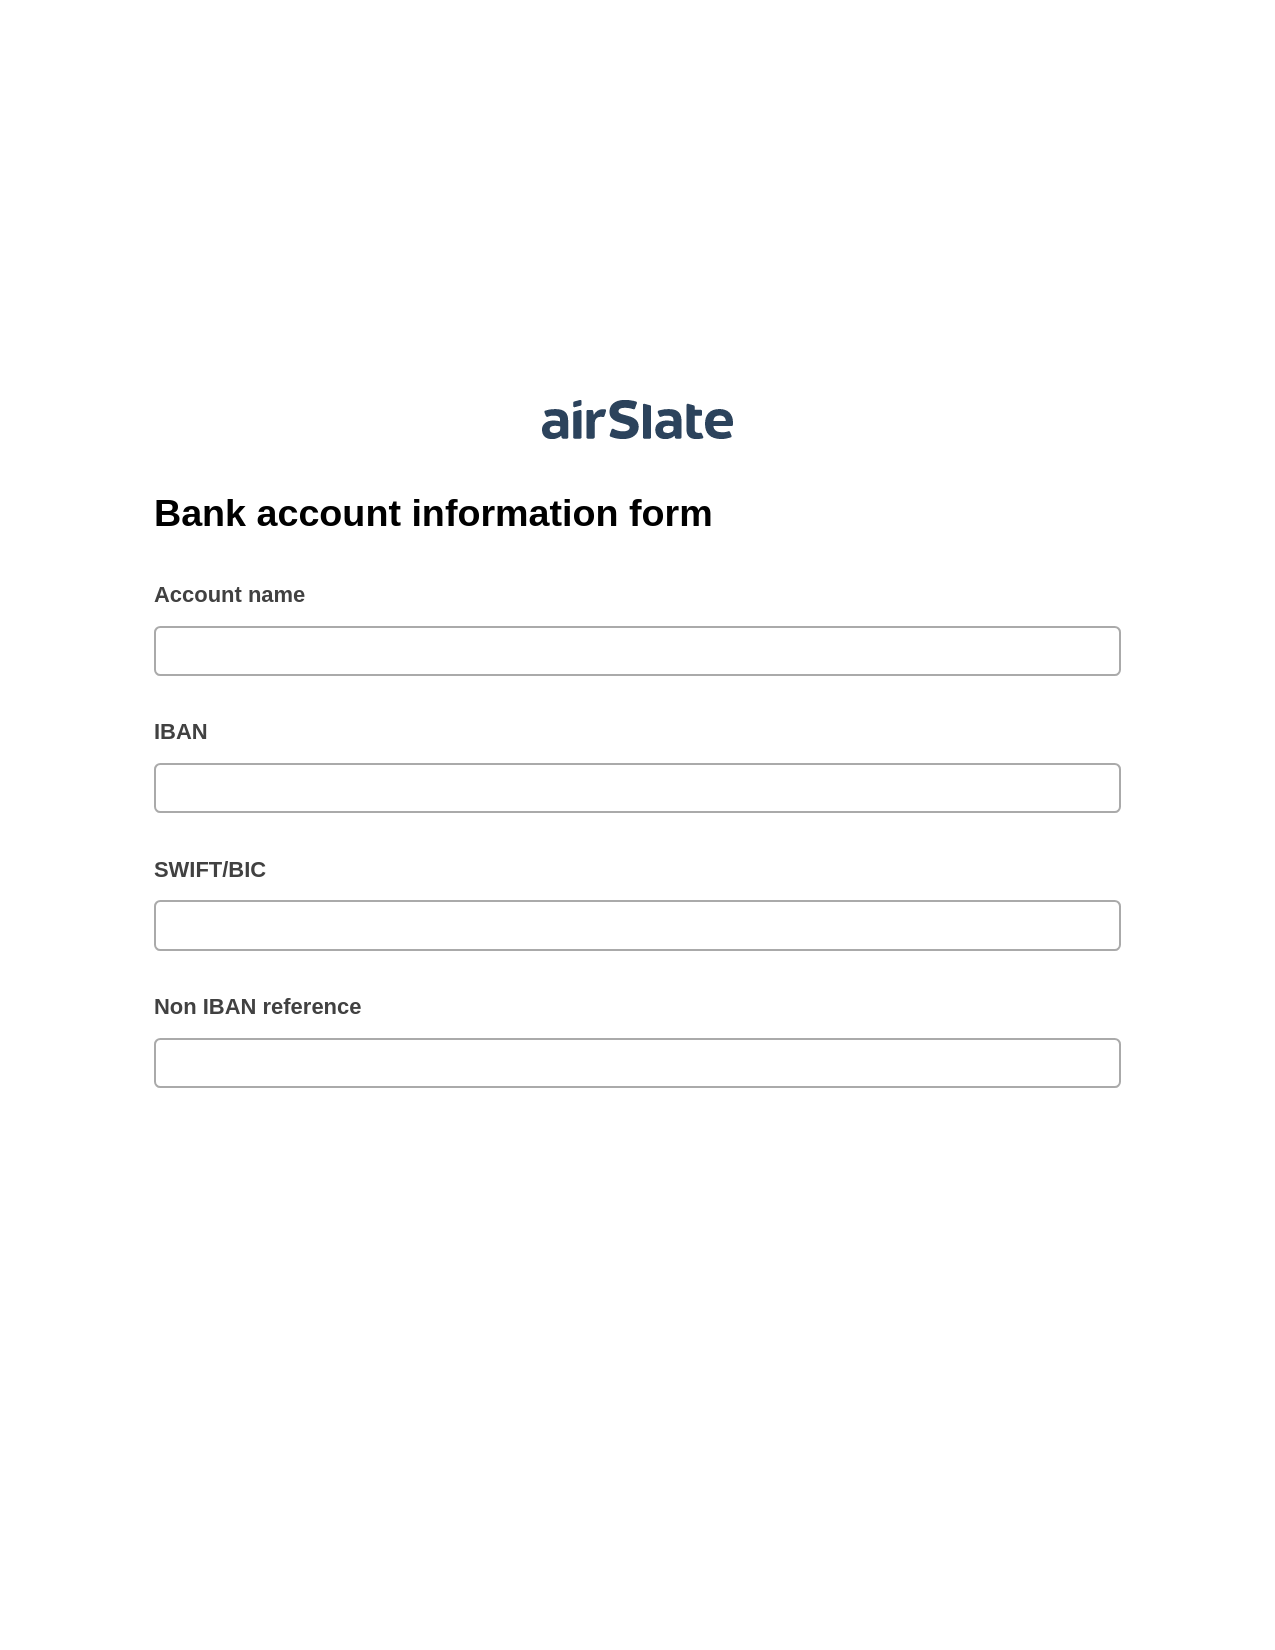 Bank account information form Pre-fill Document Bot, Export to MS Dynamics 365 Bot, Export to Excel 365 Bot